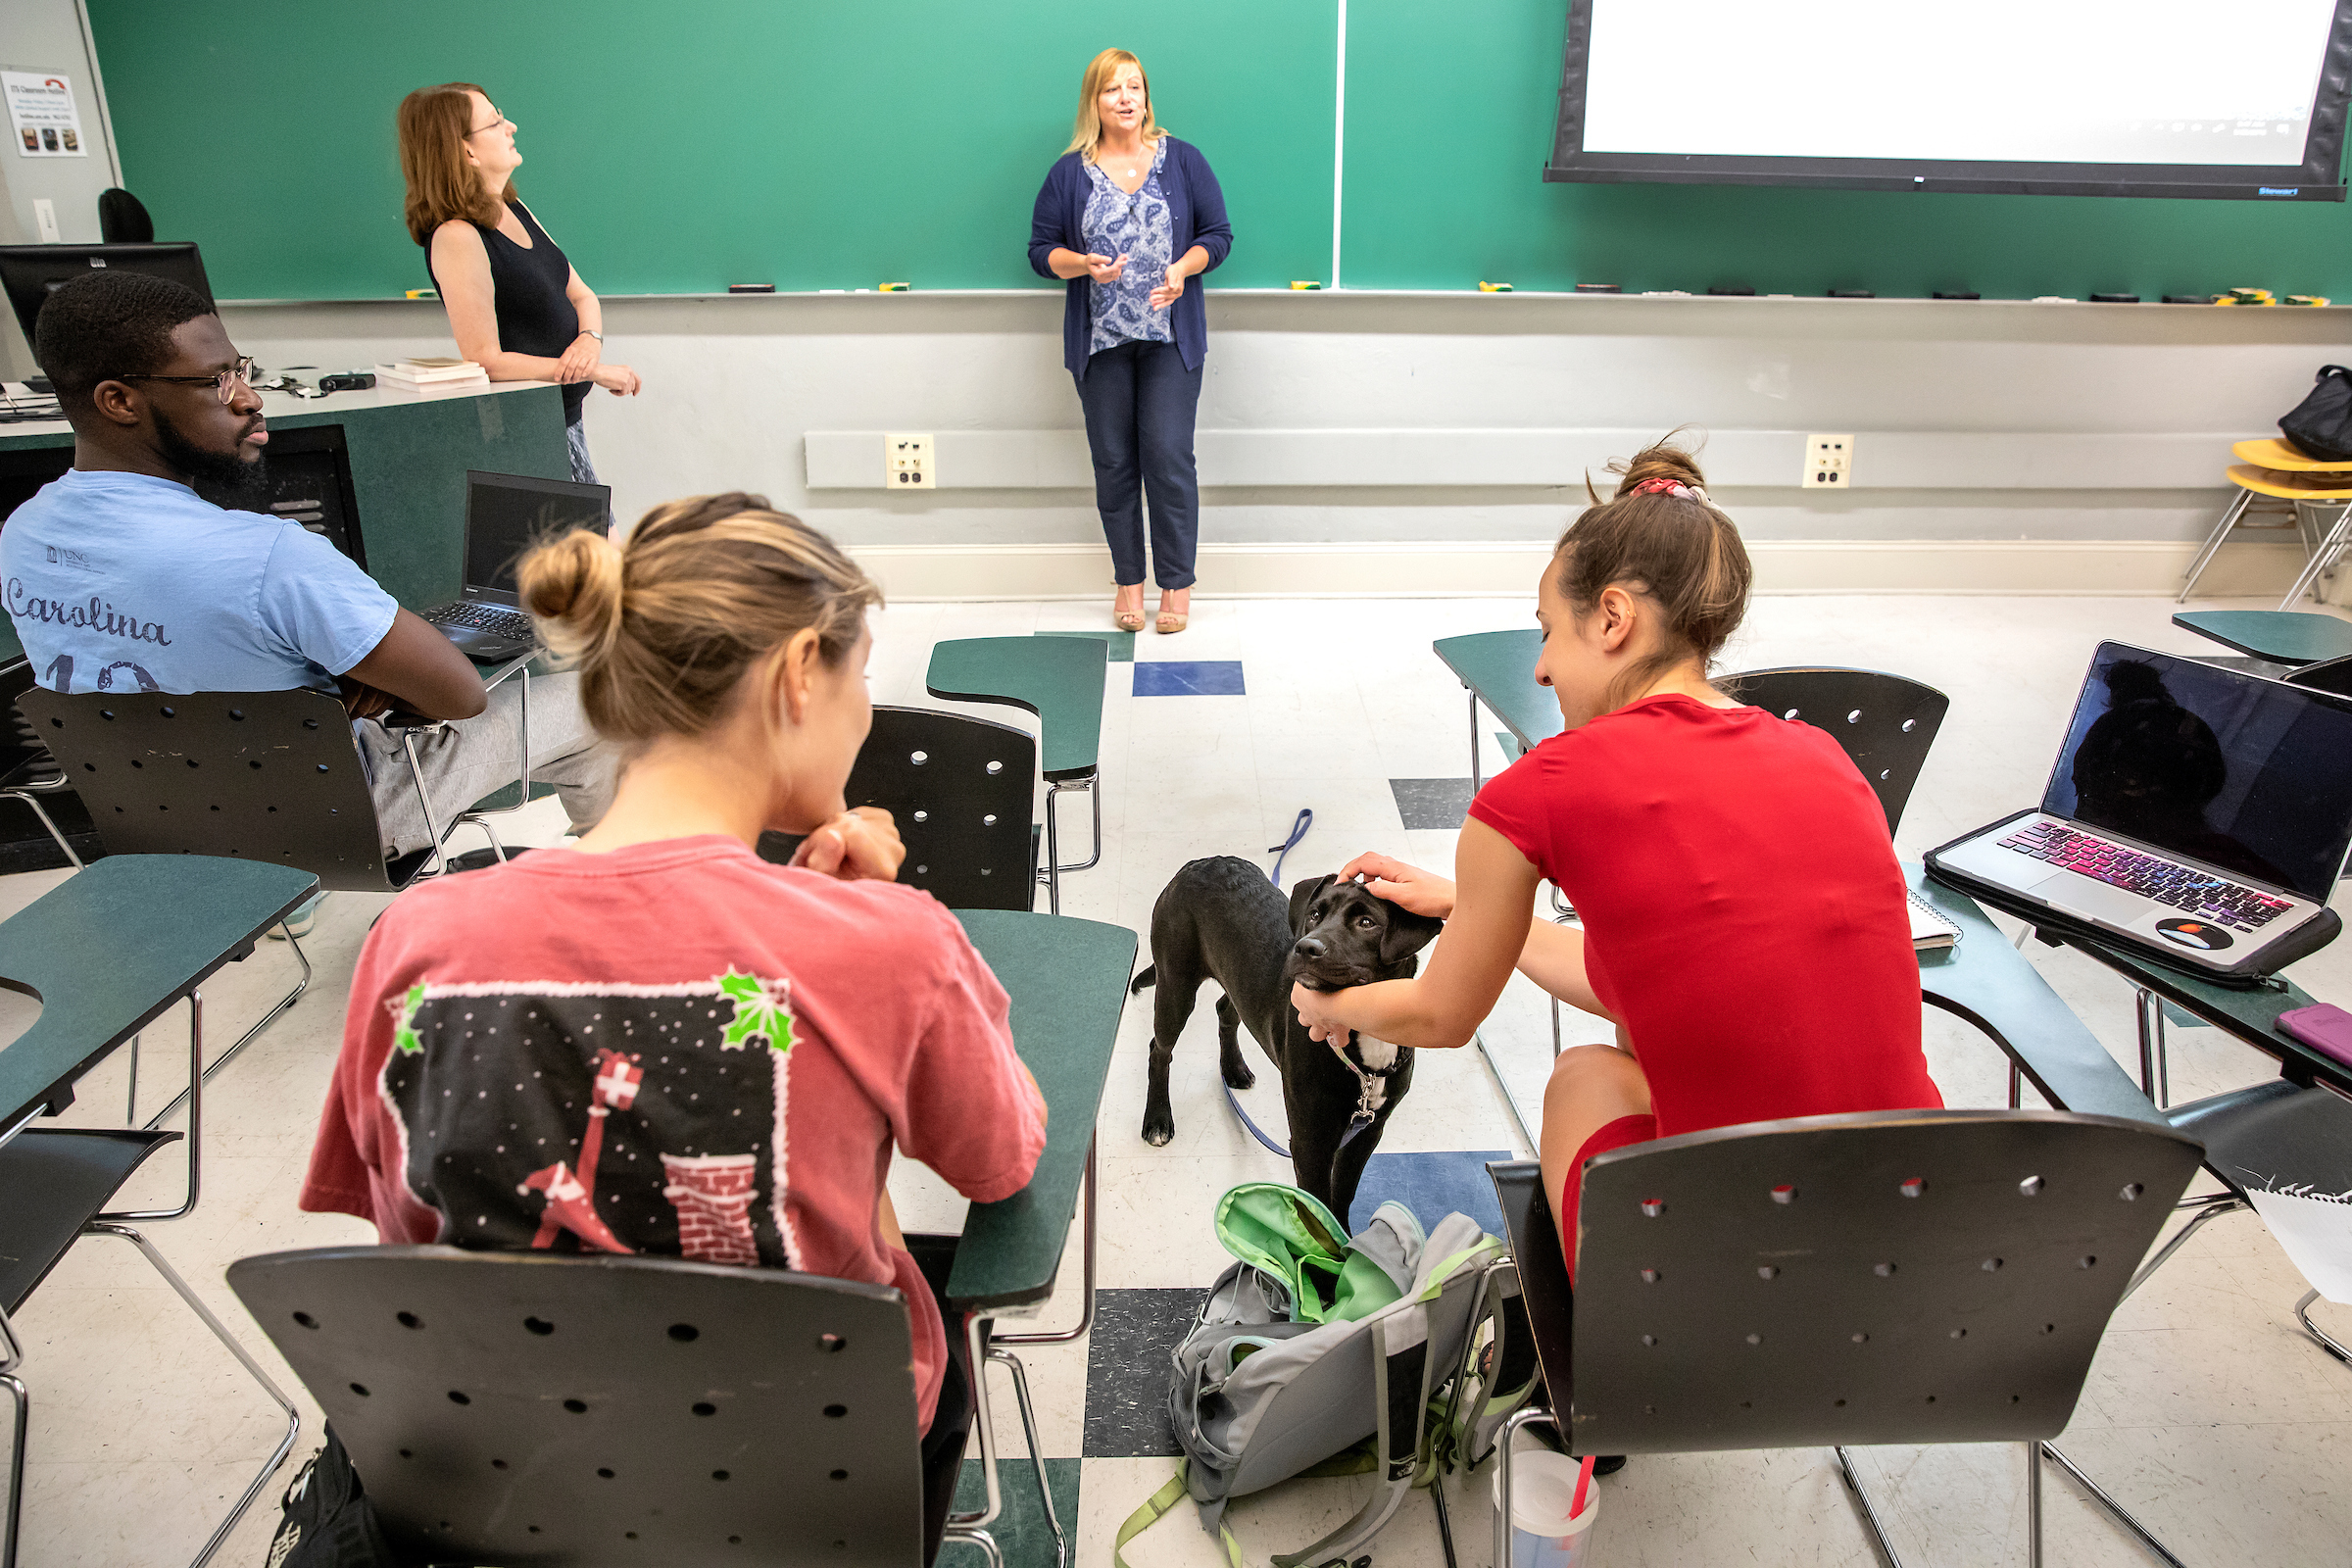 Sunny Westerman from UNC PAWS talks with the class, while support dog Posey visits with students. Anthropology associate professor Margaret Wiener, at left, looks on. (photo by Johnny Andrews)